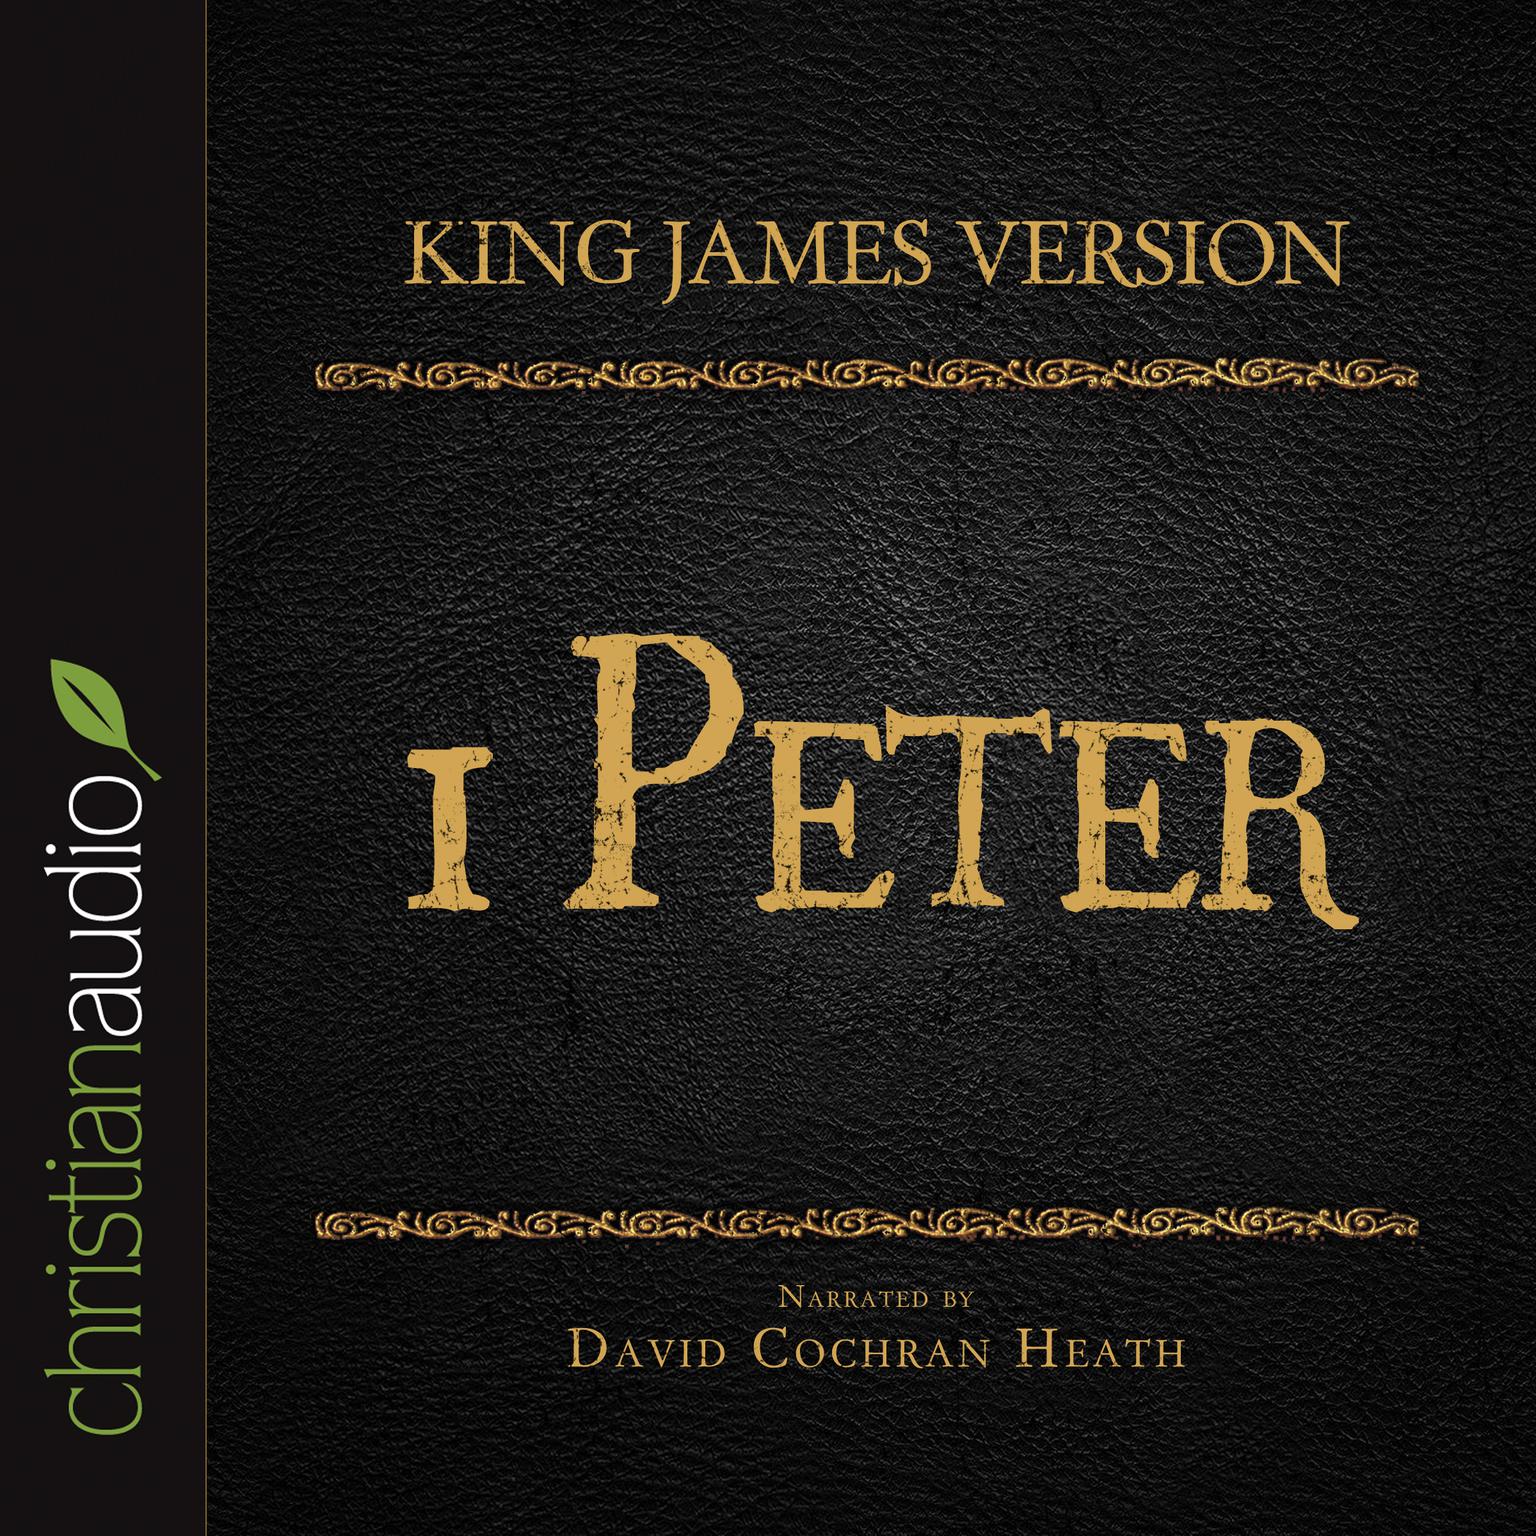 Holy Bible in Audio - King James Version: 1 Peter Audiobook, by David Cochran Heath